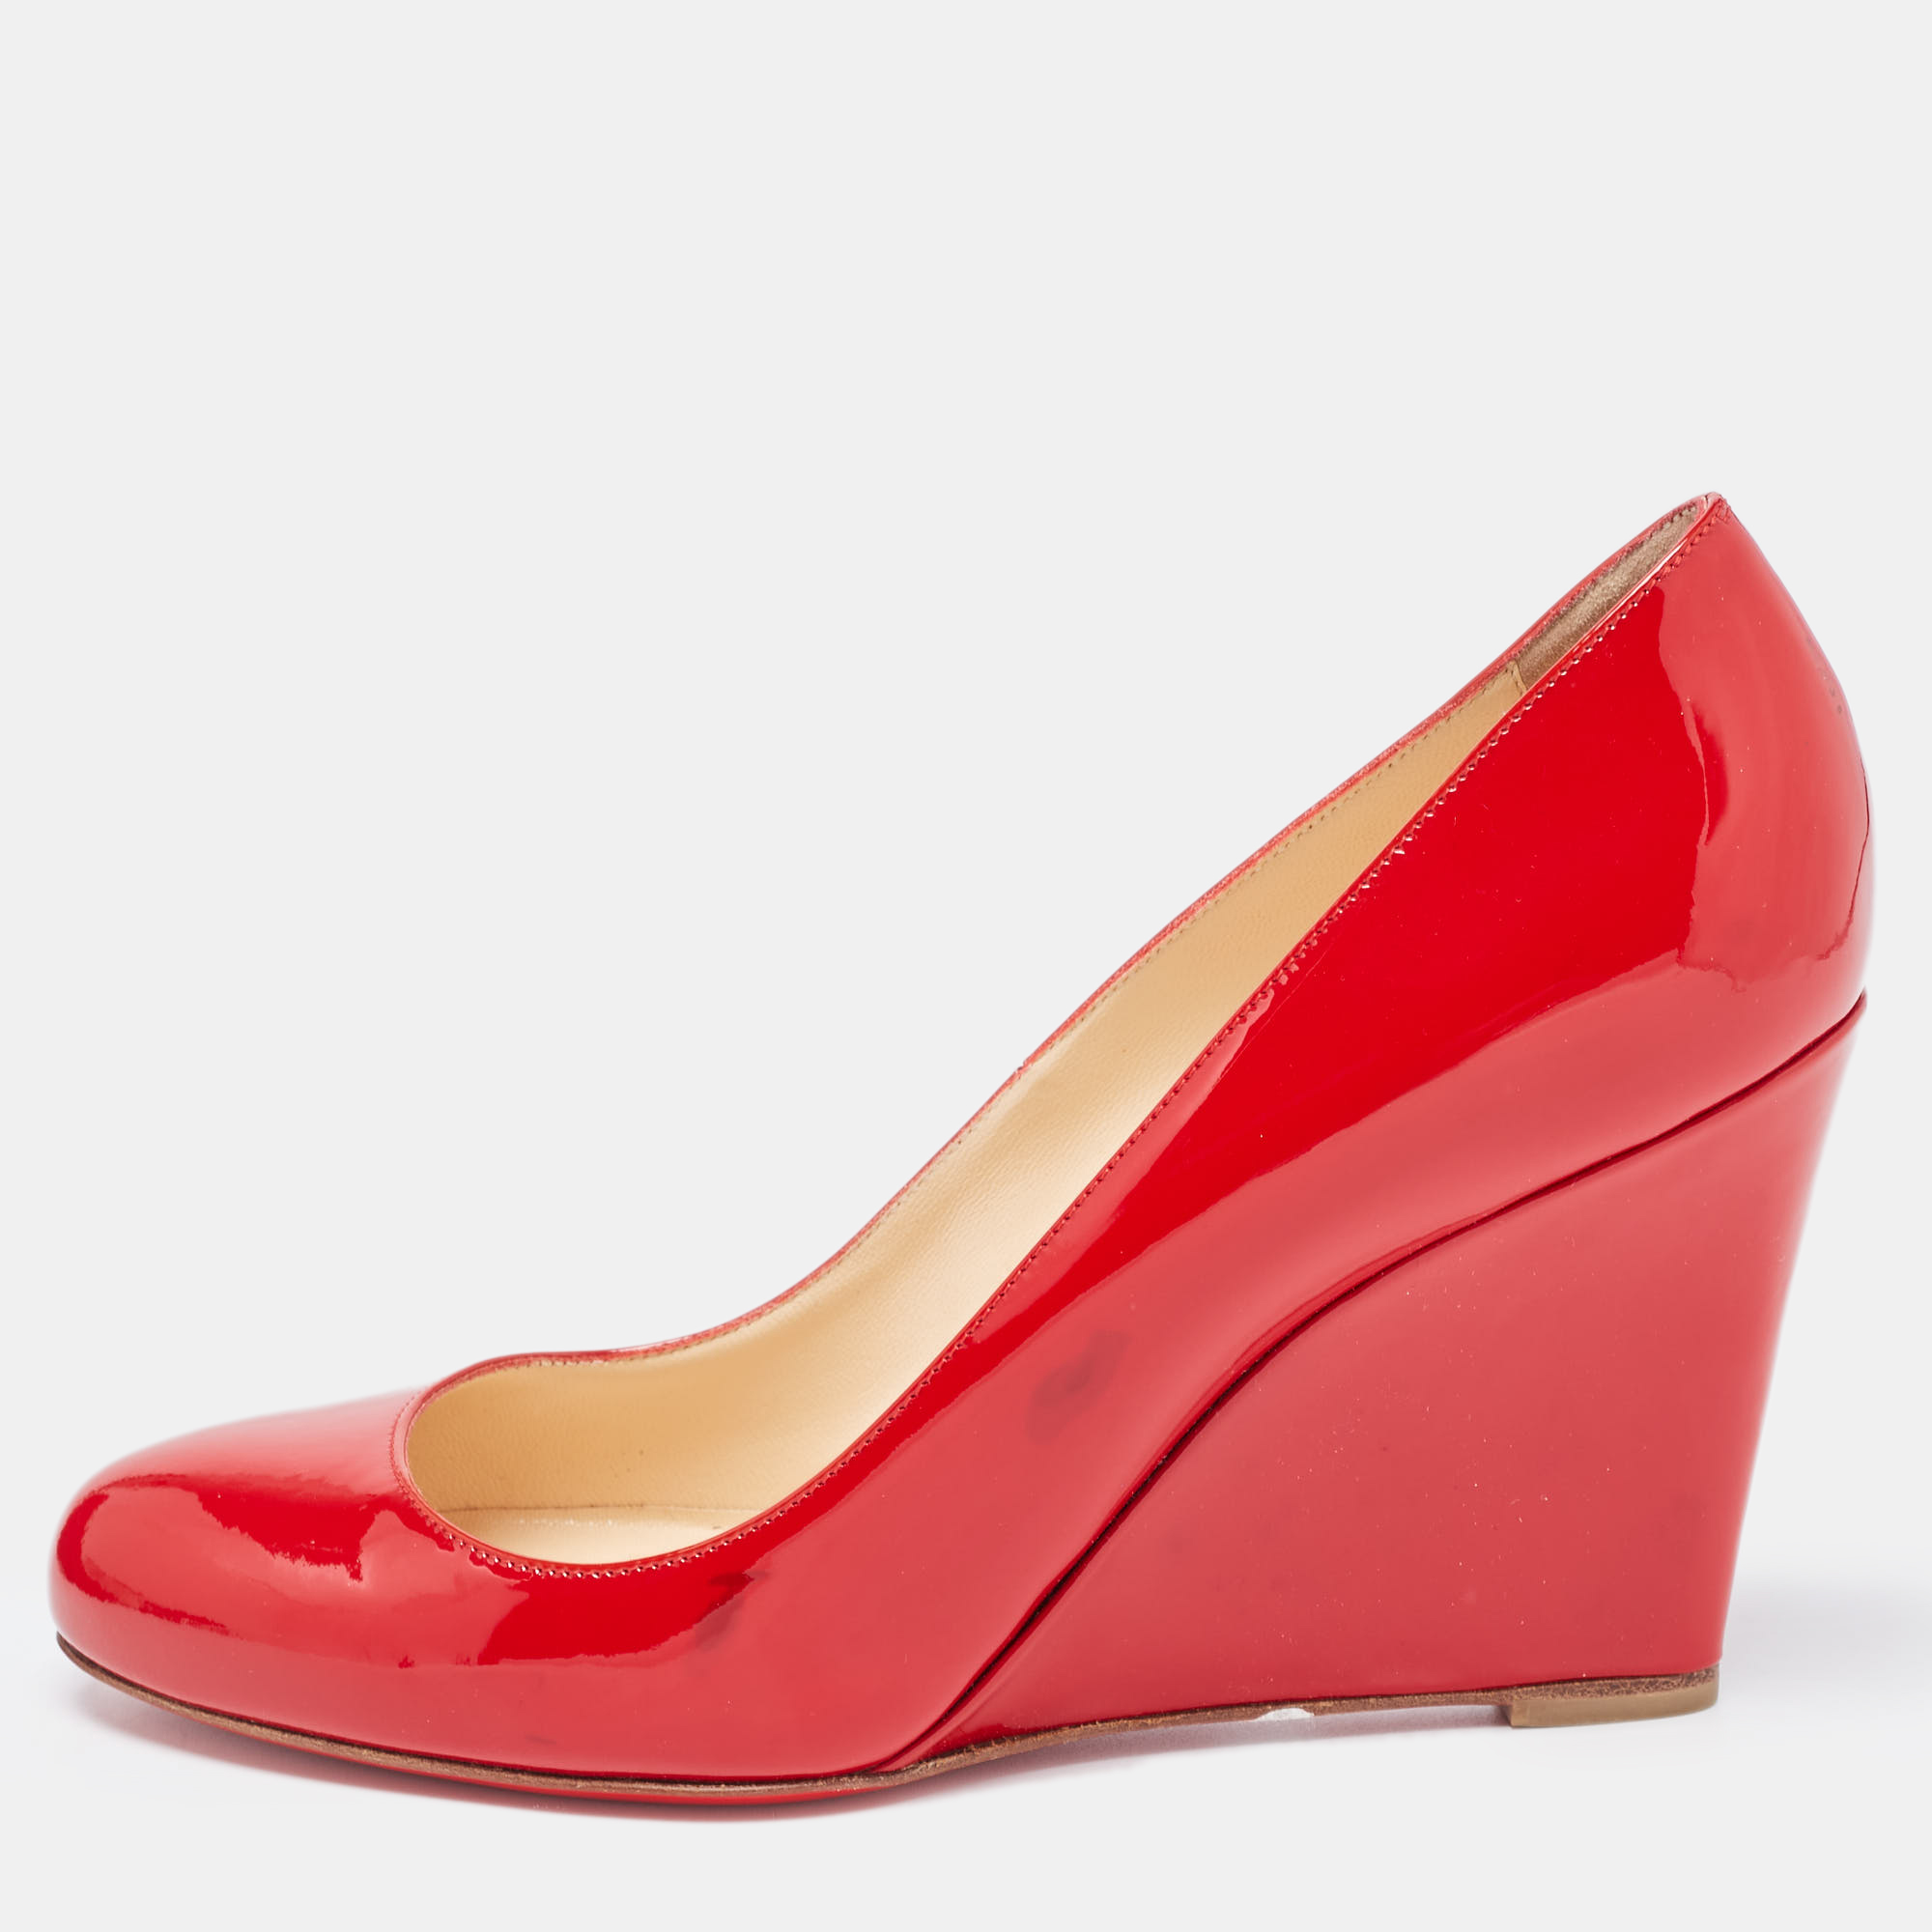 

Christian Louboutin Red Patent Leather Ron Ron Wedge Pumps Size